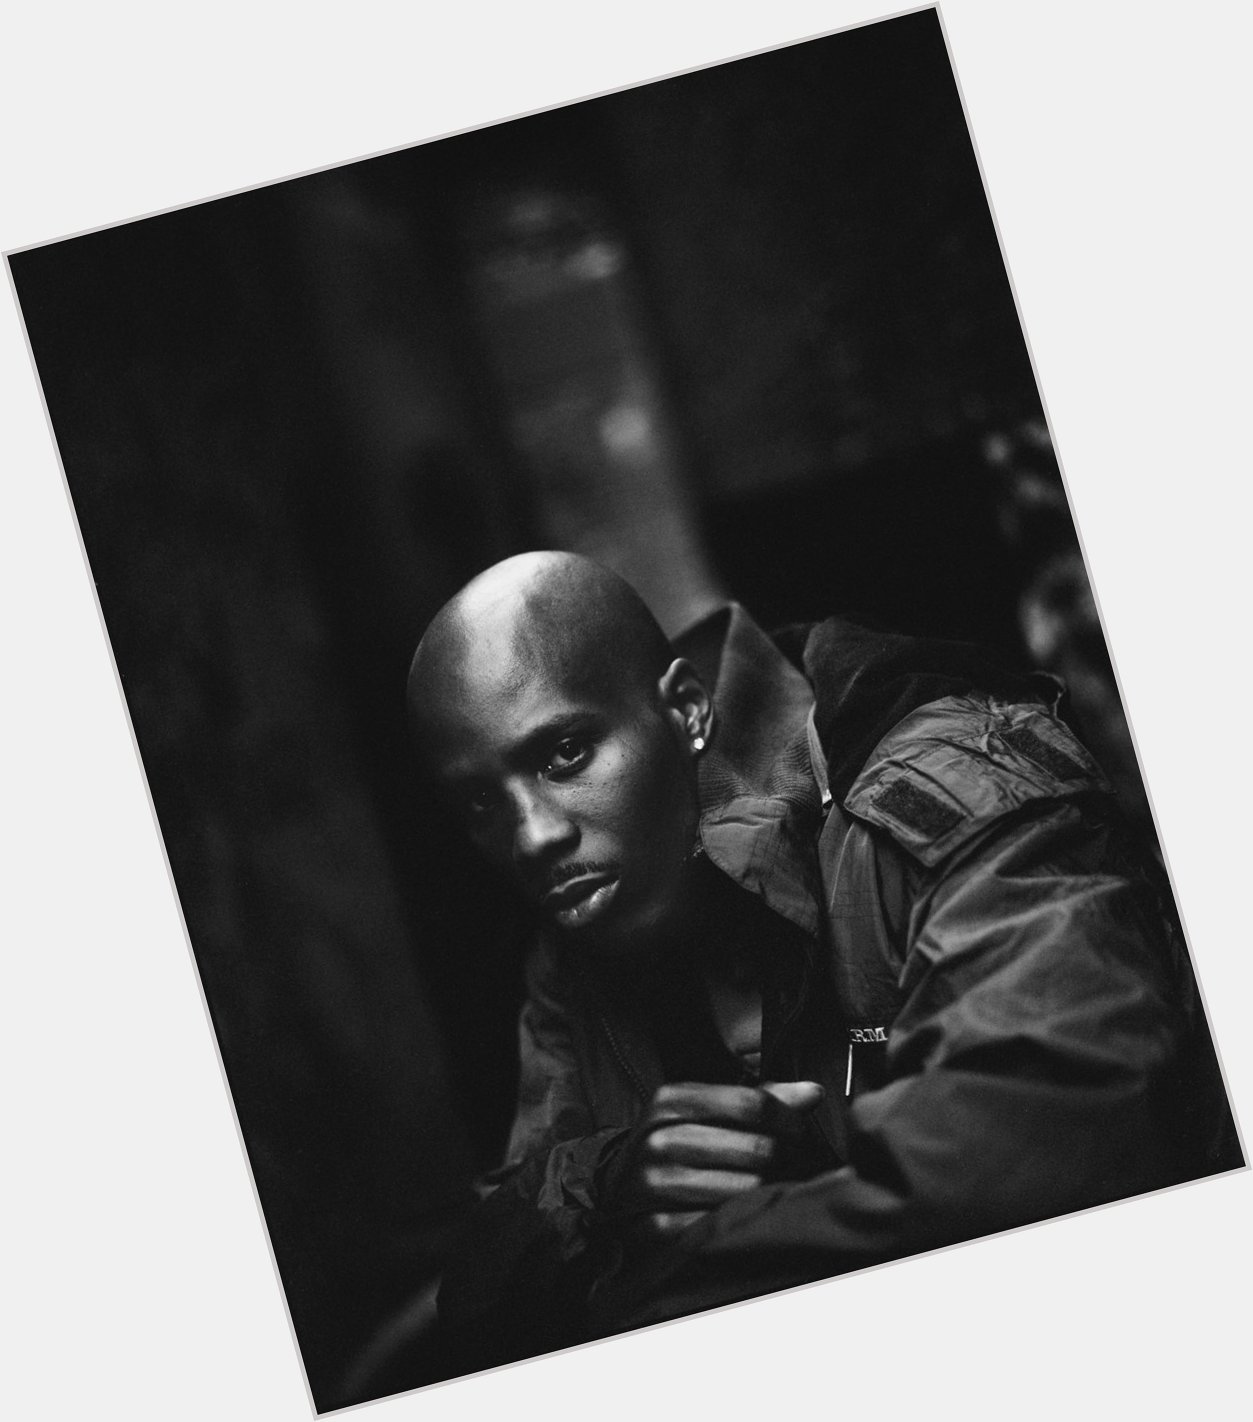 Happy birthday to DMX! What s your favorite song or album from him? 